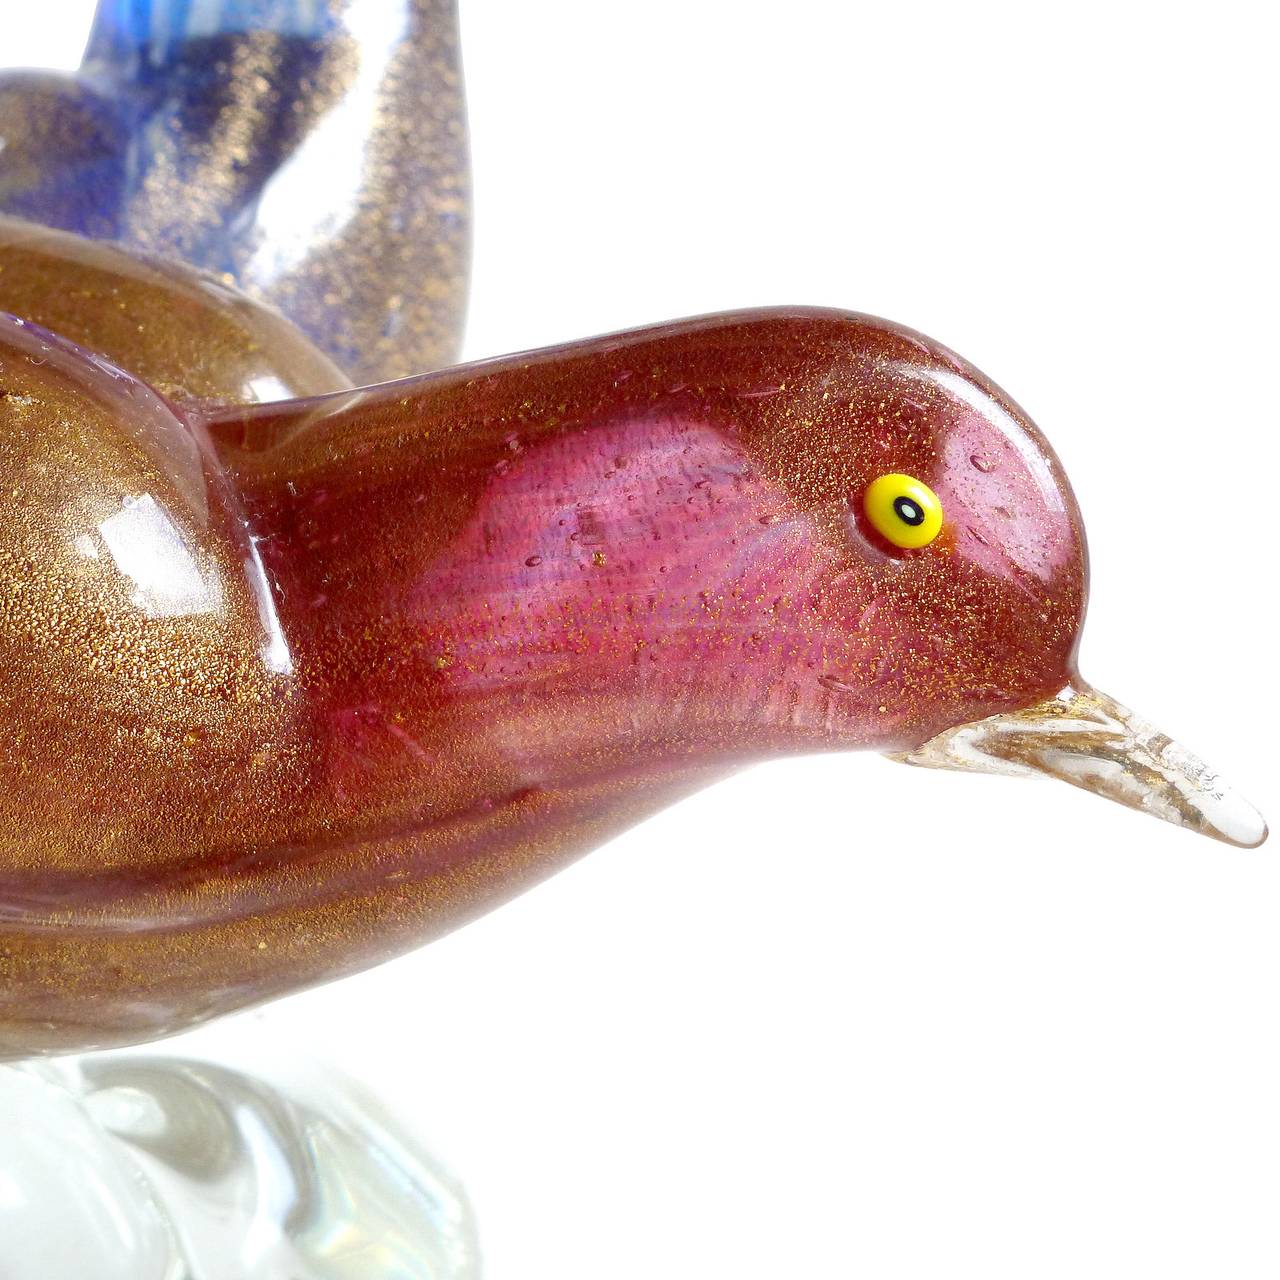 FREE Shipping Worldwide! See details below description.

Lovely Murano hand blown red-pink, blue and gold flecks art glass courting birds sculpture. Documented to the Aureliano Toso company. Each bird is made with color pigments, and covered in